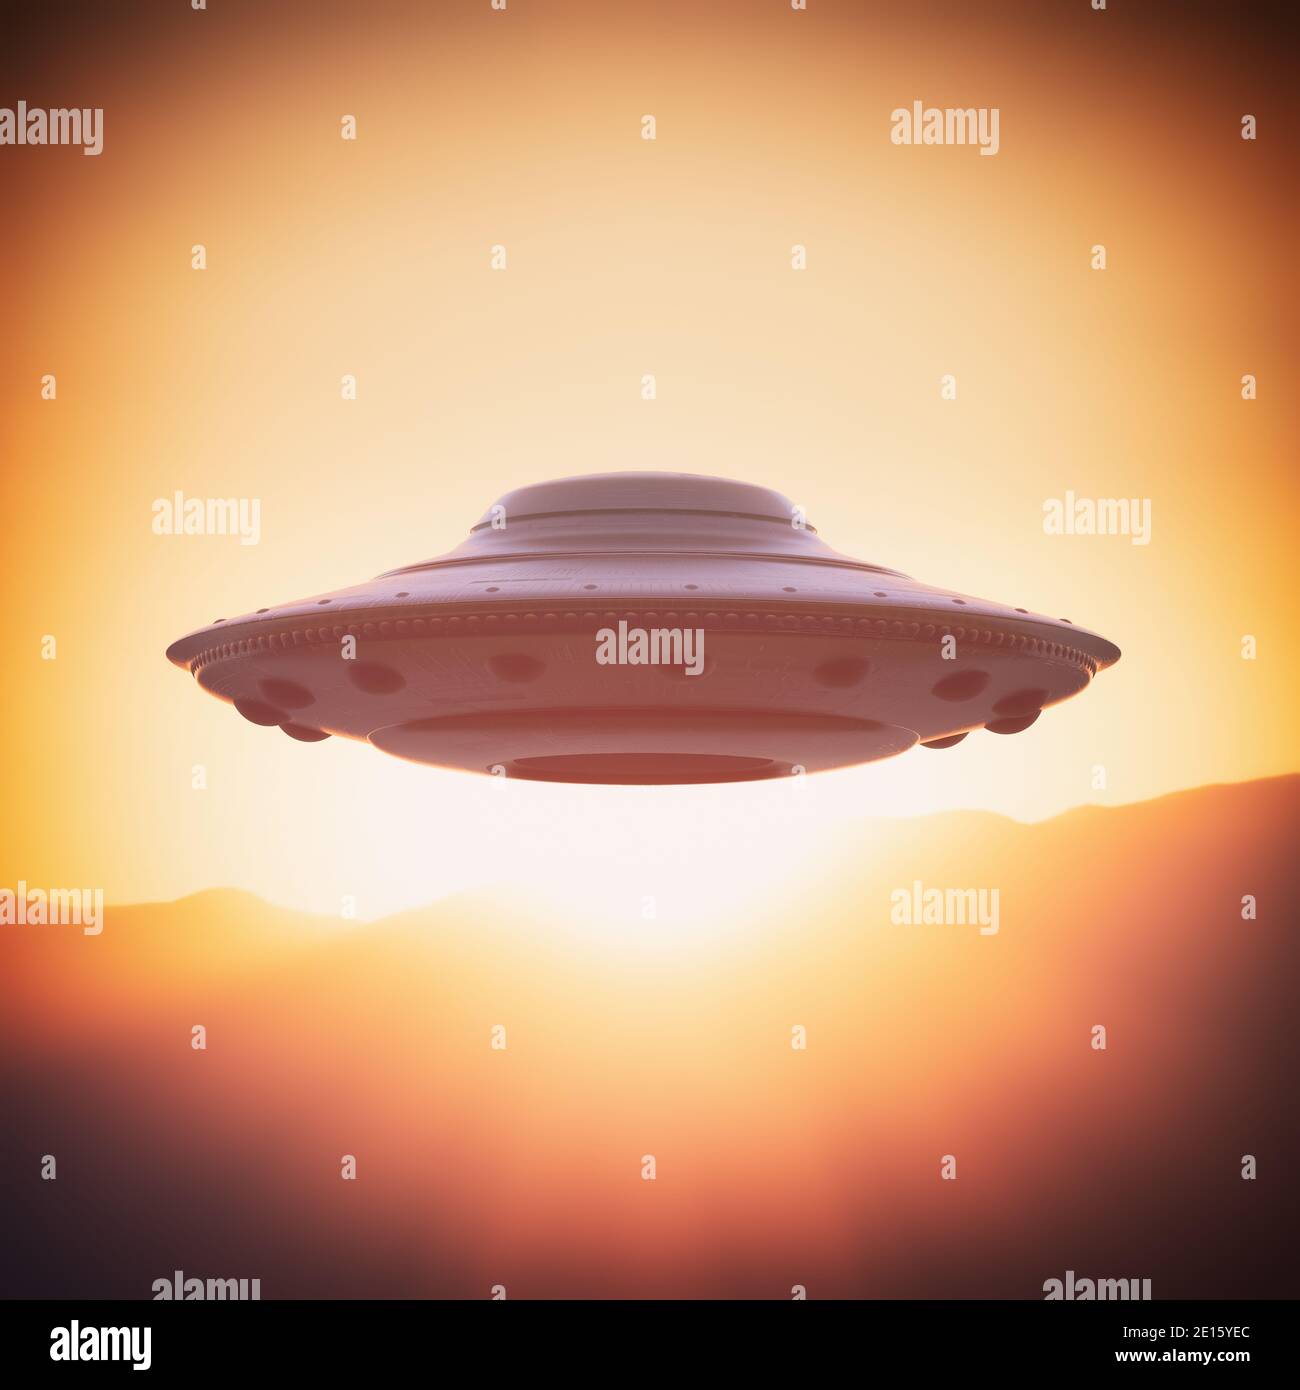 Unidentified flying object, UFO. Alien spaceship gravitating in the sky with the sun behind. 3D illustration, ufology concept. Clipping path included. Stock Photo